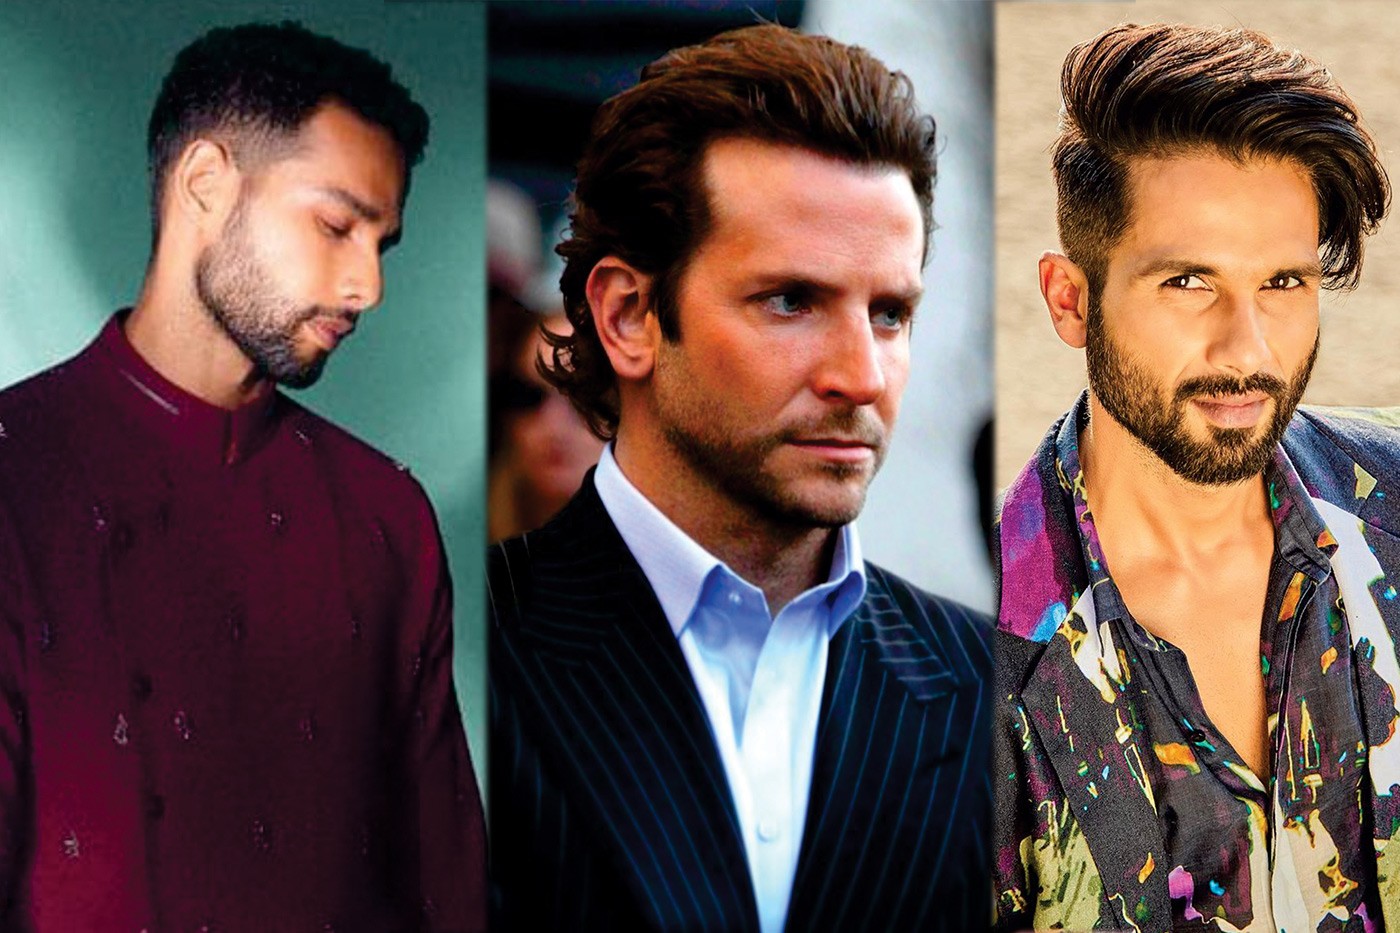 Celebrity Hairstyles: 17 MUST-SEE Male Hair Transformations - Capital